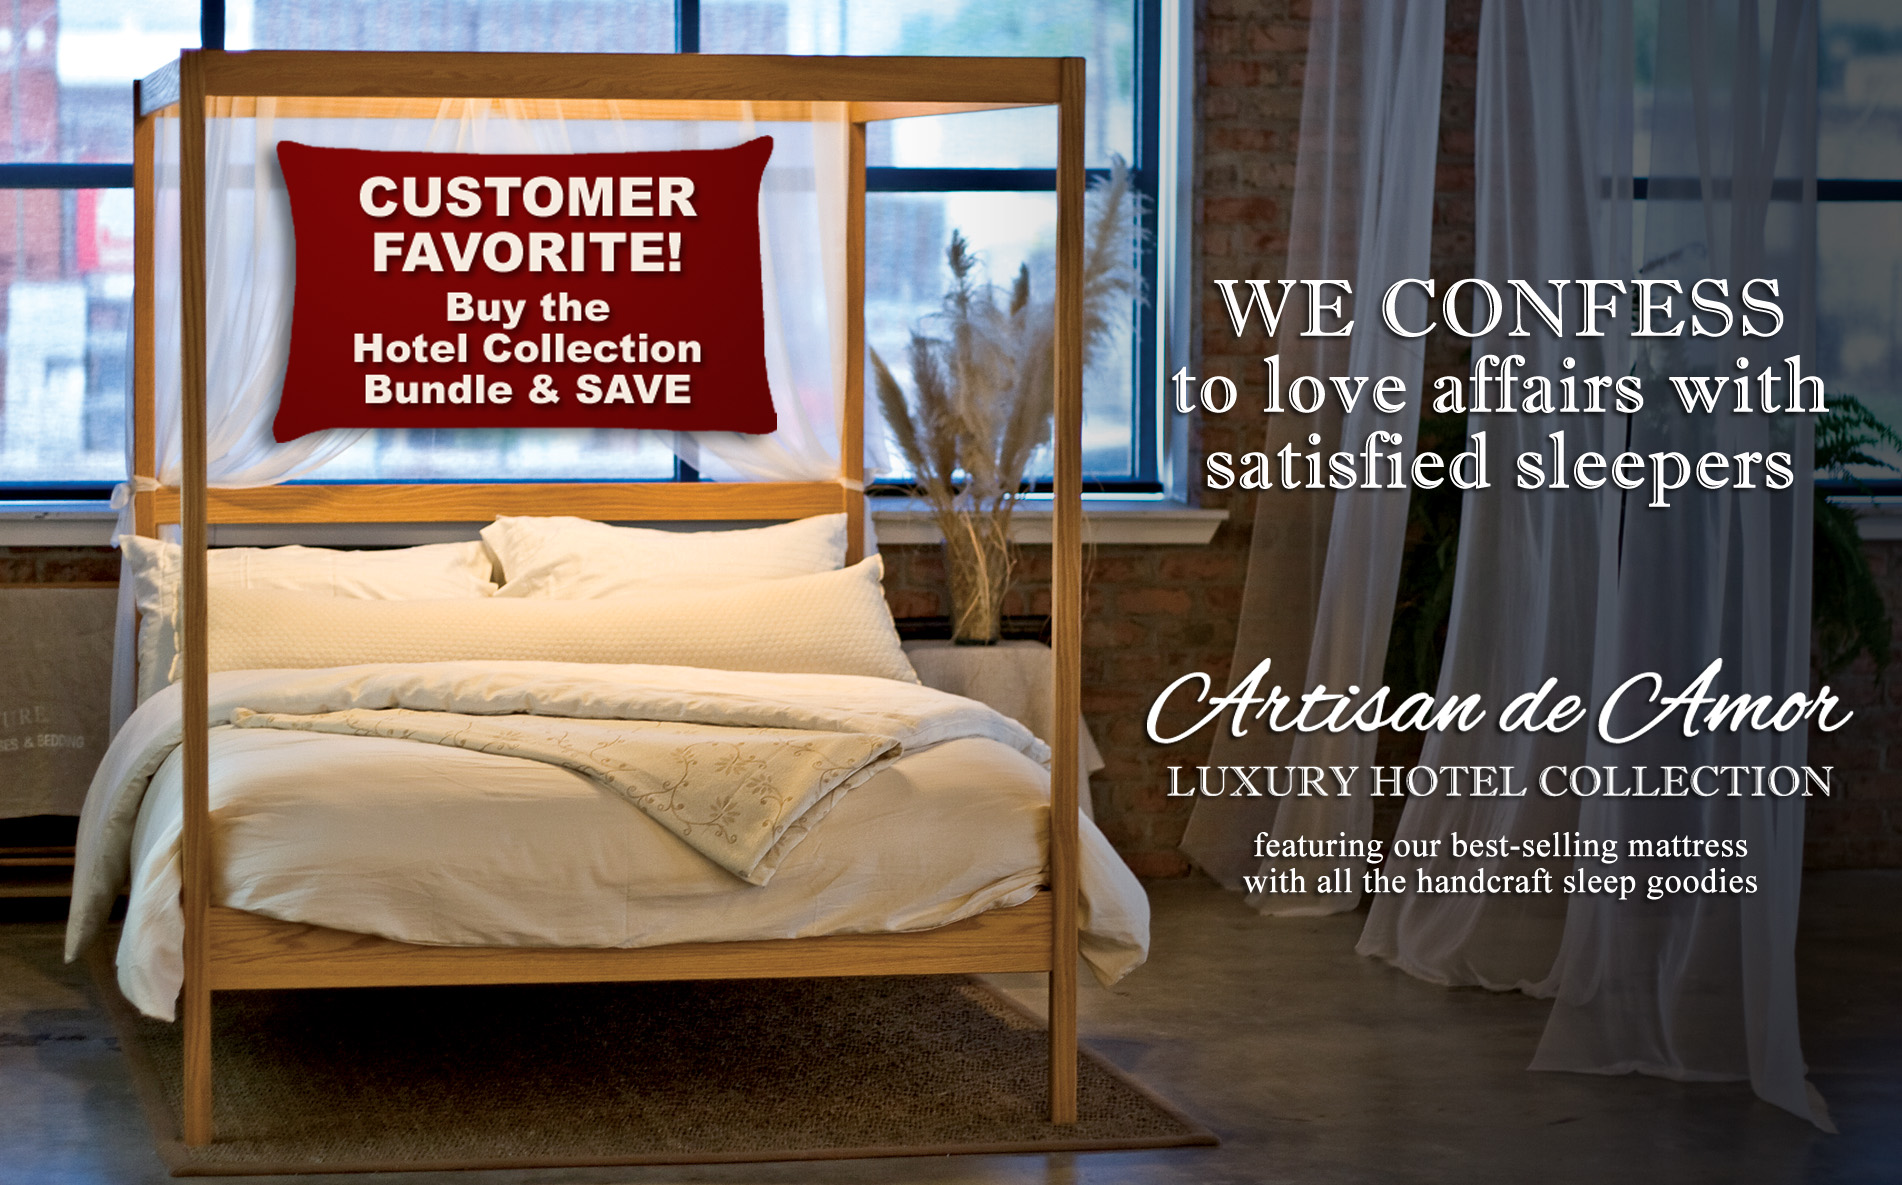 Save! Buy the Hotel Collection